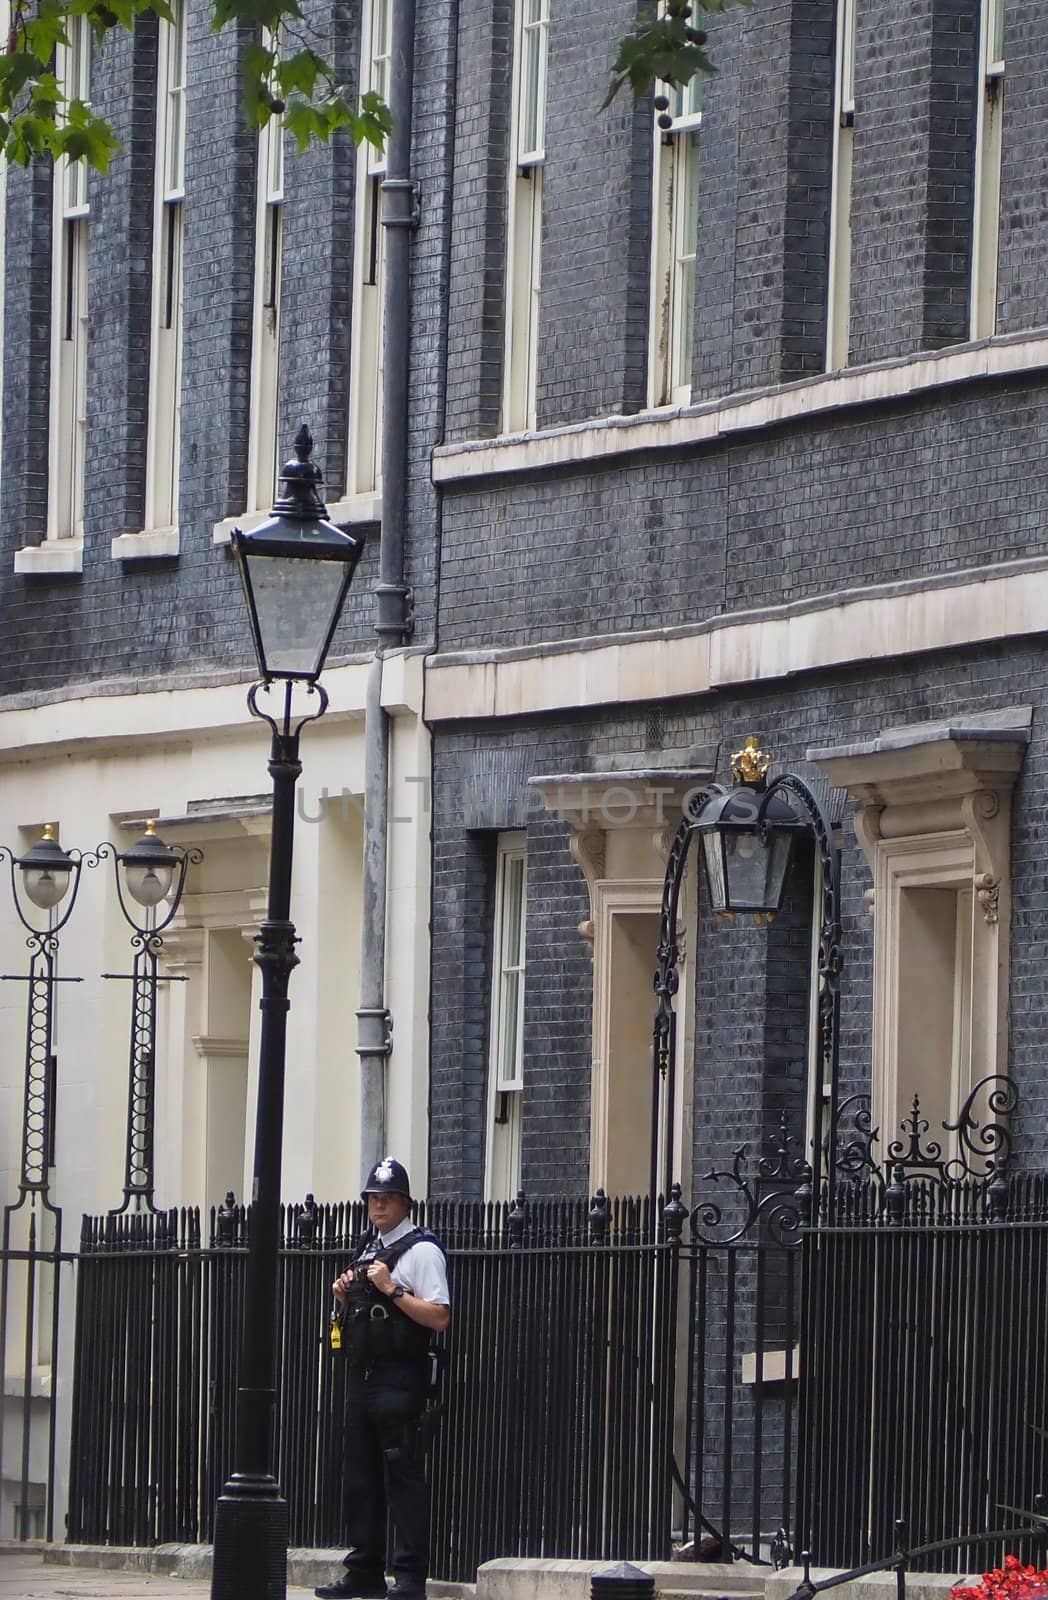 LONDON, UK - CIRCA SEPTEMBER 2019: Number 10 Downing Street headquarters of the Government and official residence of the Prime Minister of the United Kingdom